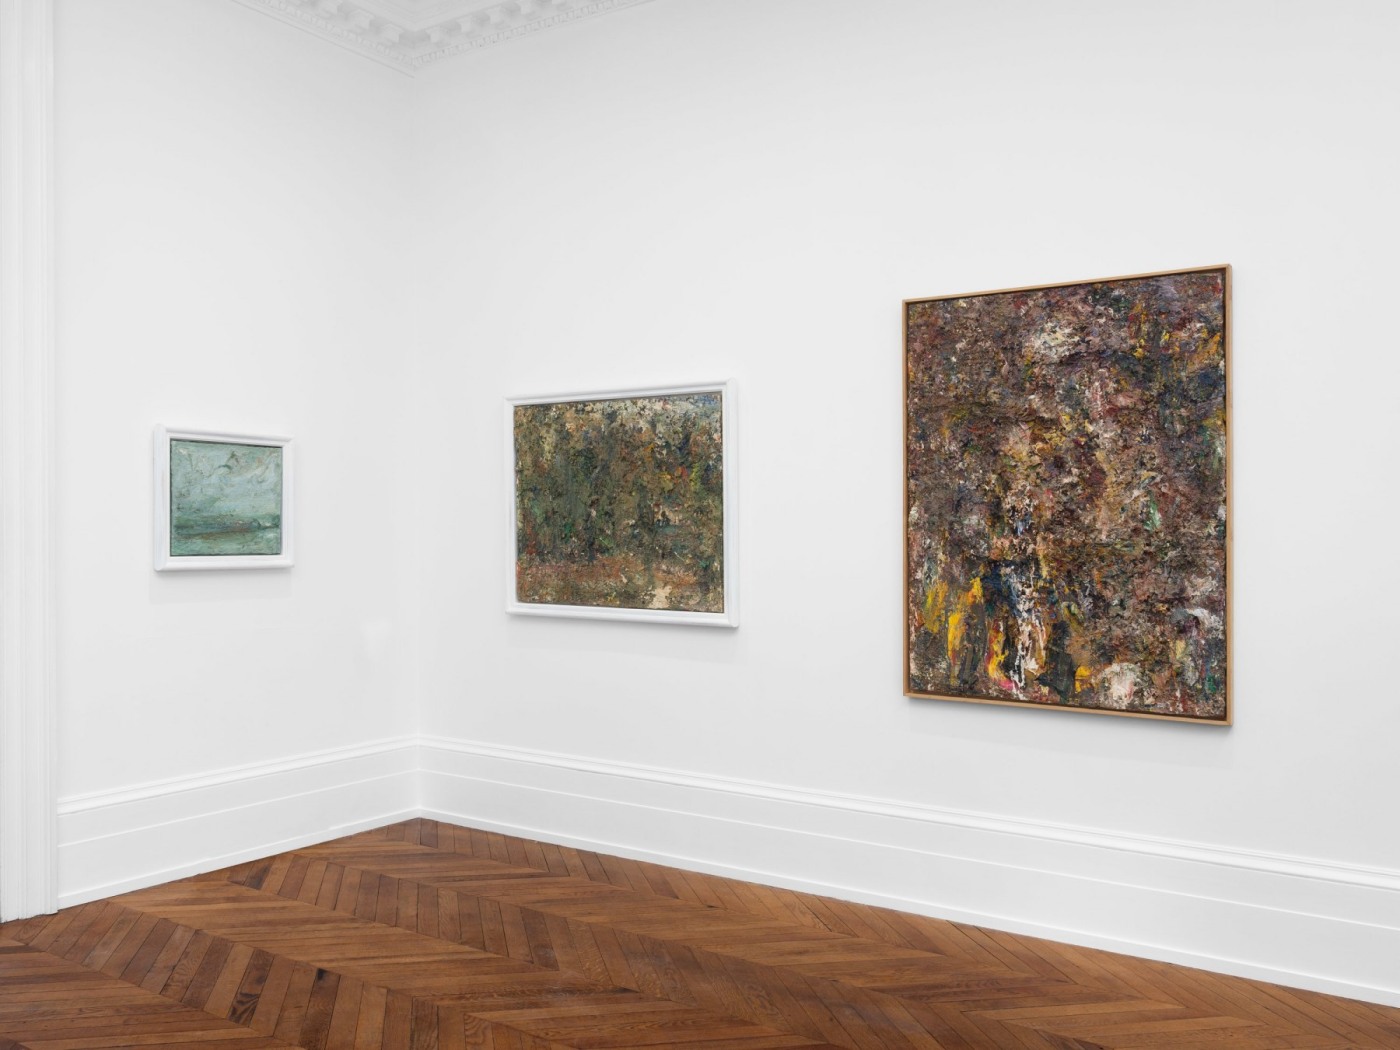 Installation image for Eugène Leroy: The Materiality of Light, Paintings 1950-1999, at Michael Werner Gallery